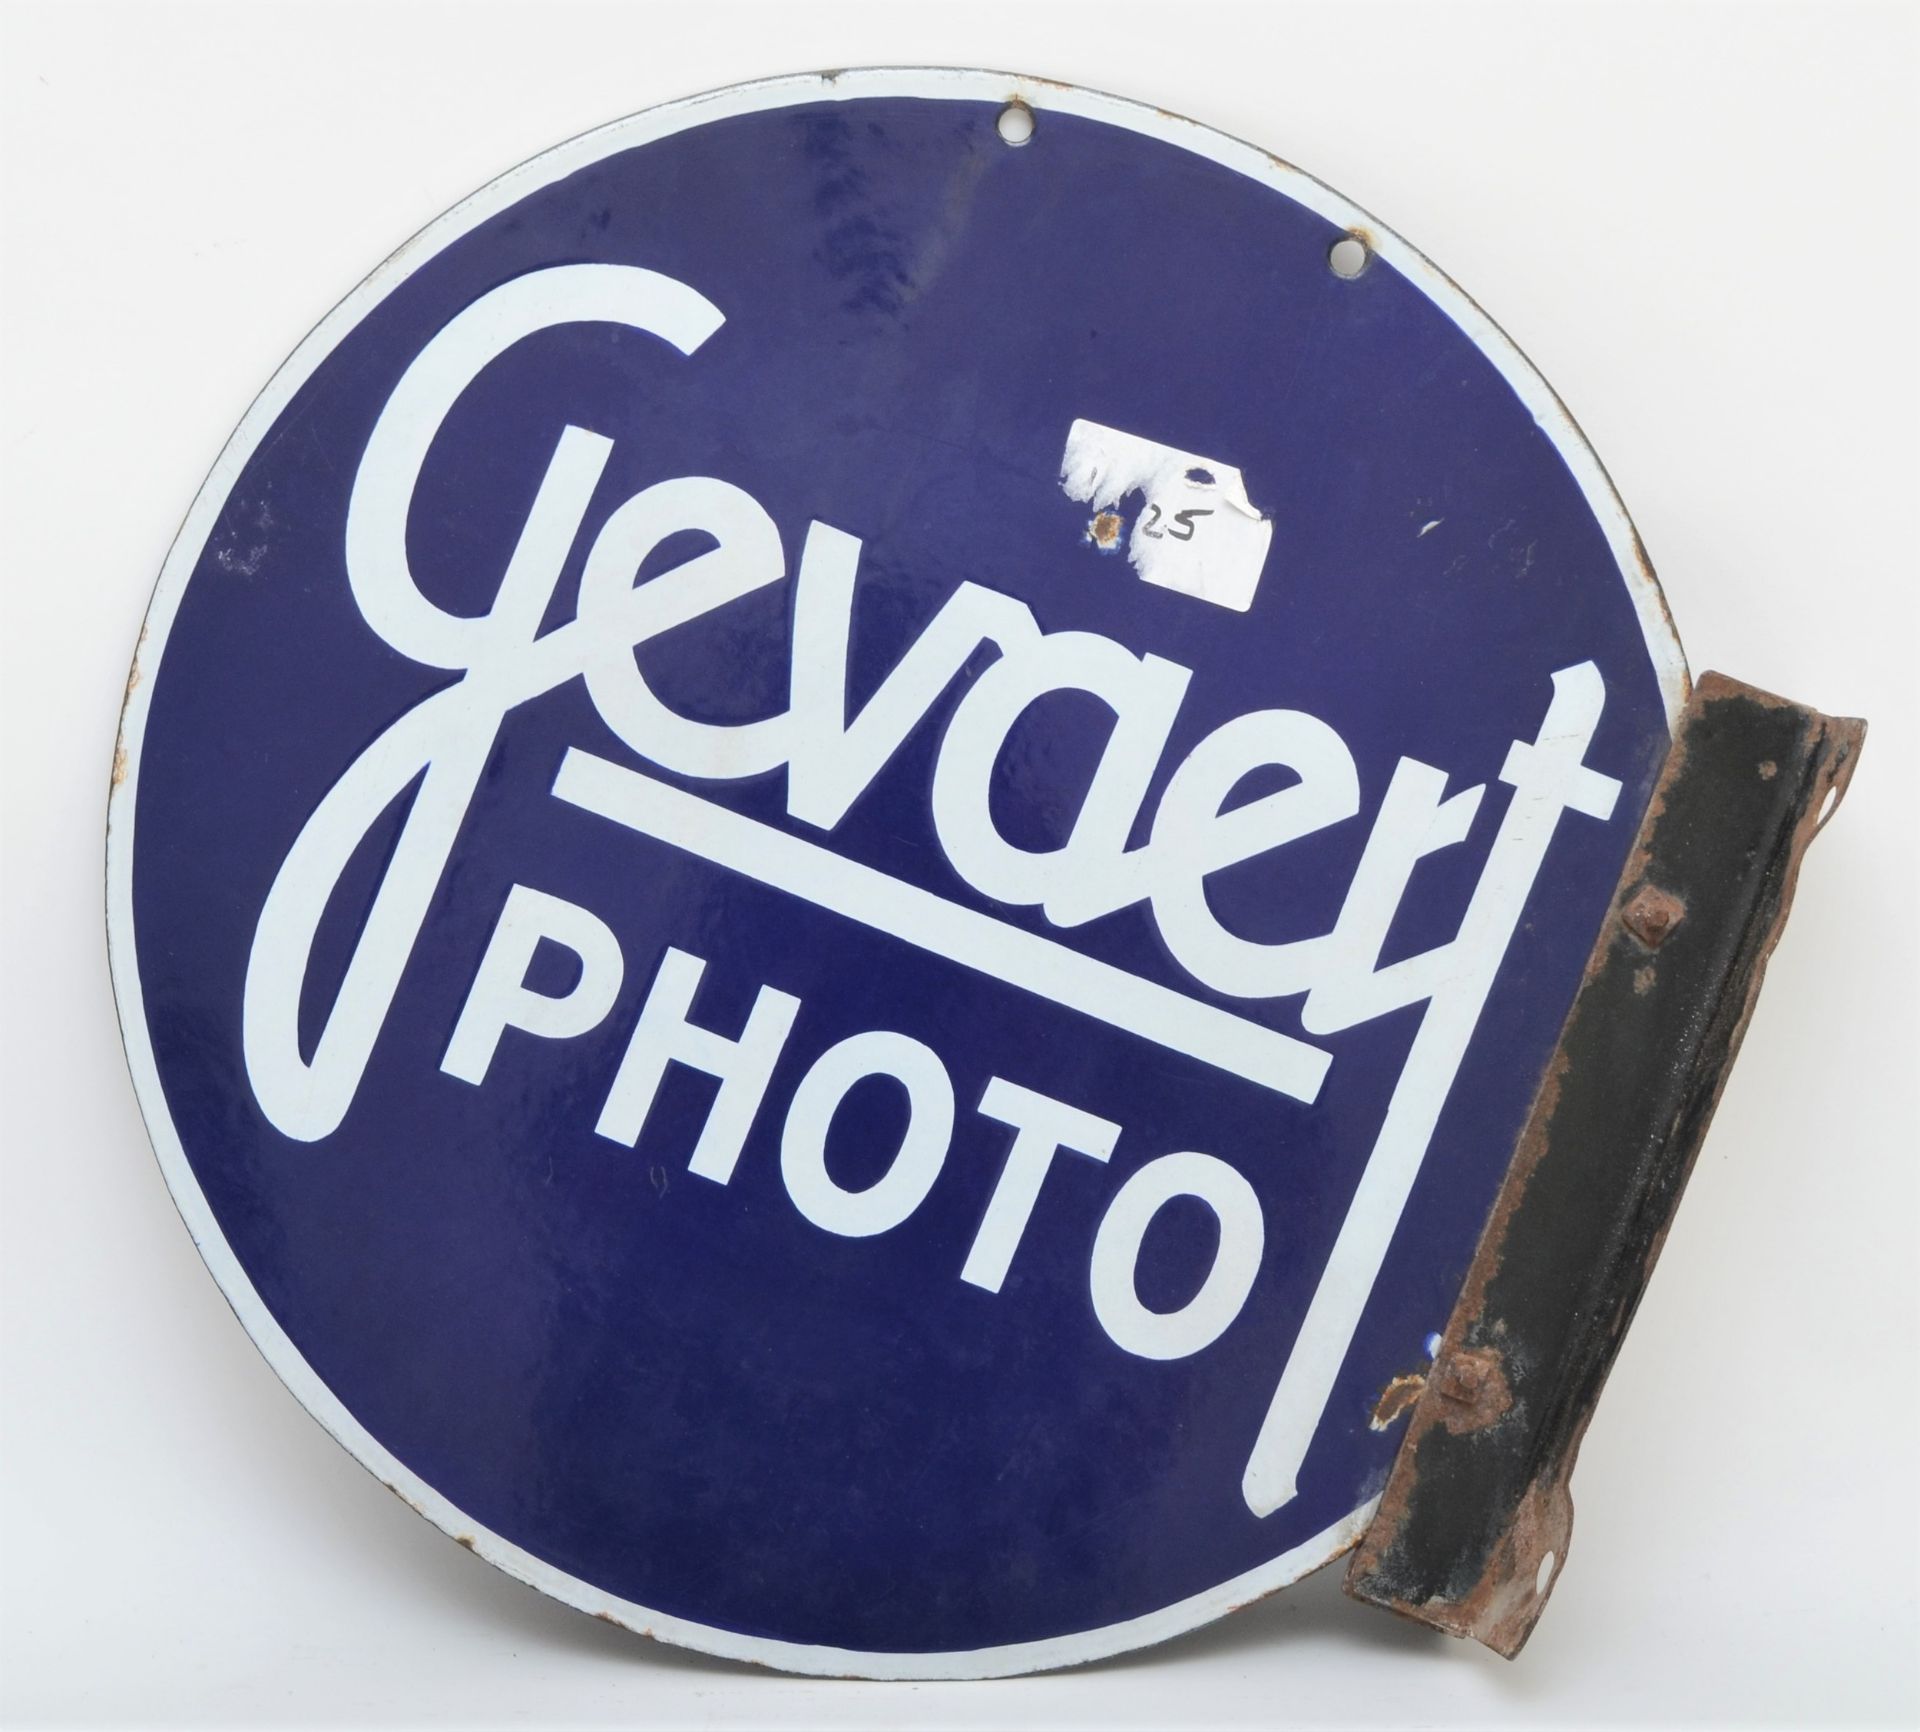 A vitreous enamel Gevaert Photo double sided wall mounted signe, 45cm diameter - Image 2 of 2